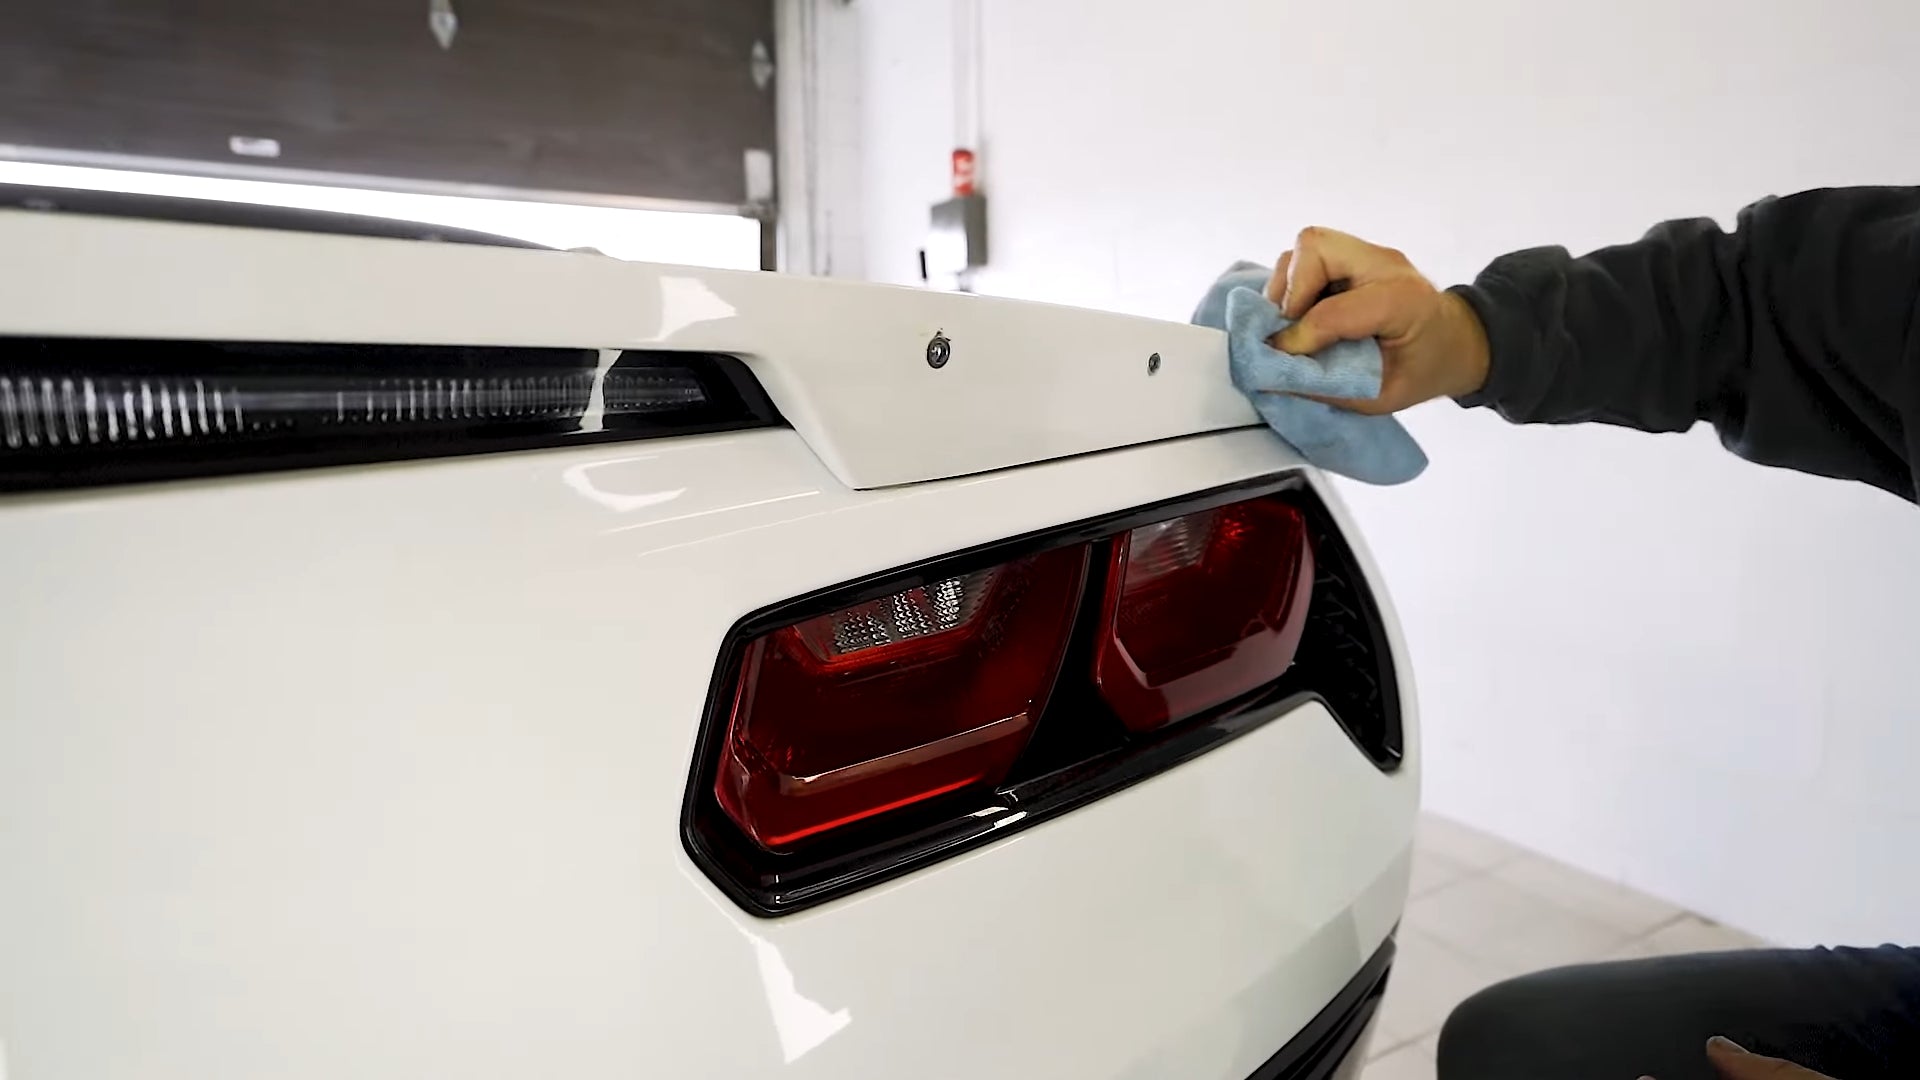 Surface Cleaning: clean the dirt on the spoiler surface using a solvent base cleaner and then remove wax and residue using an alcohol-based solution.